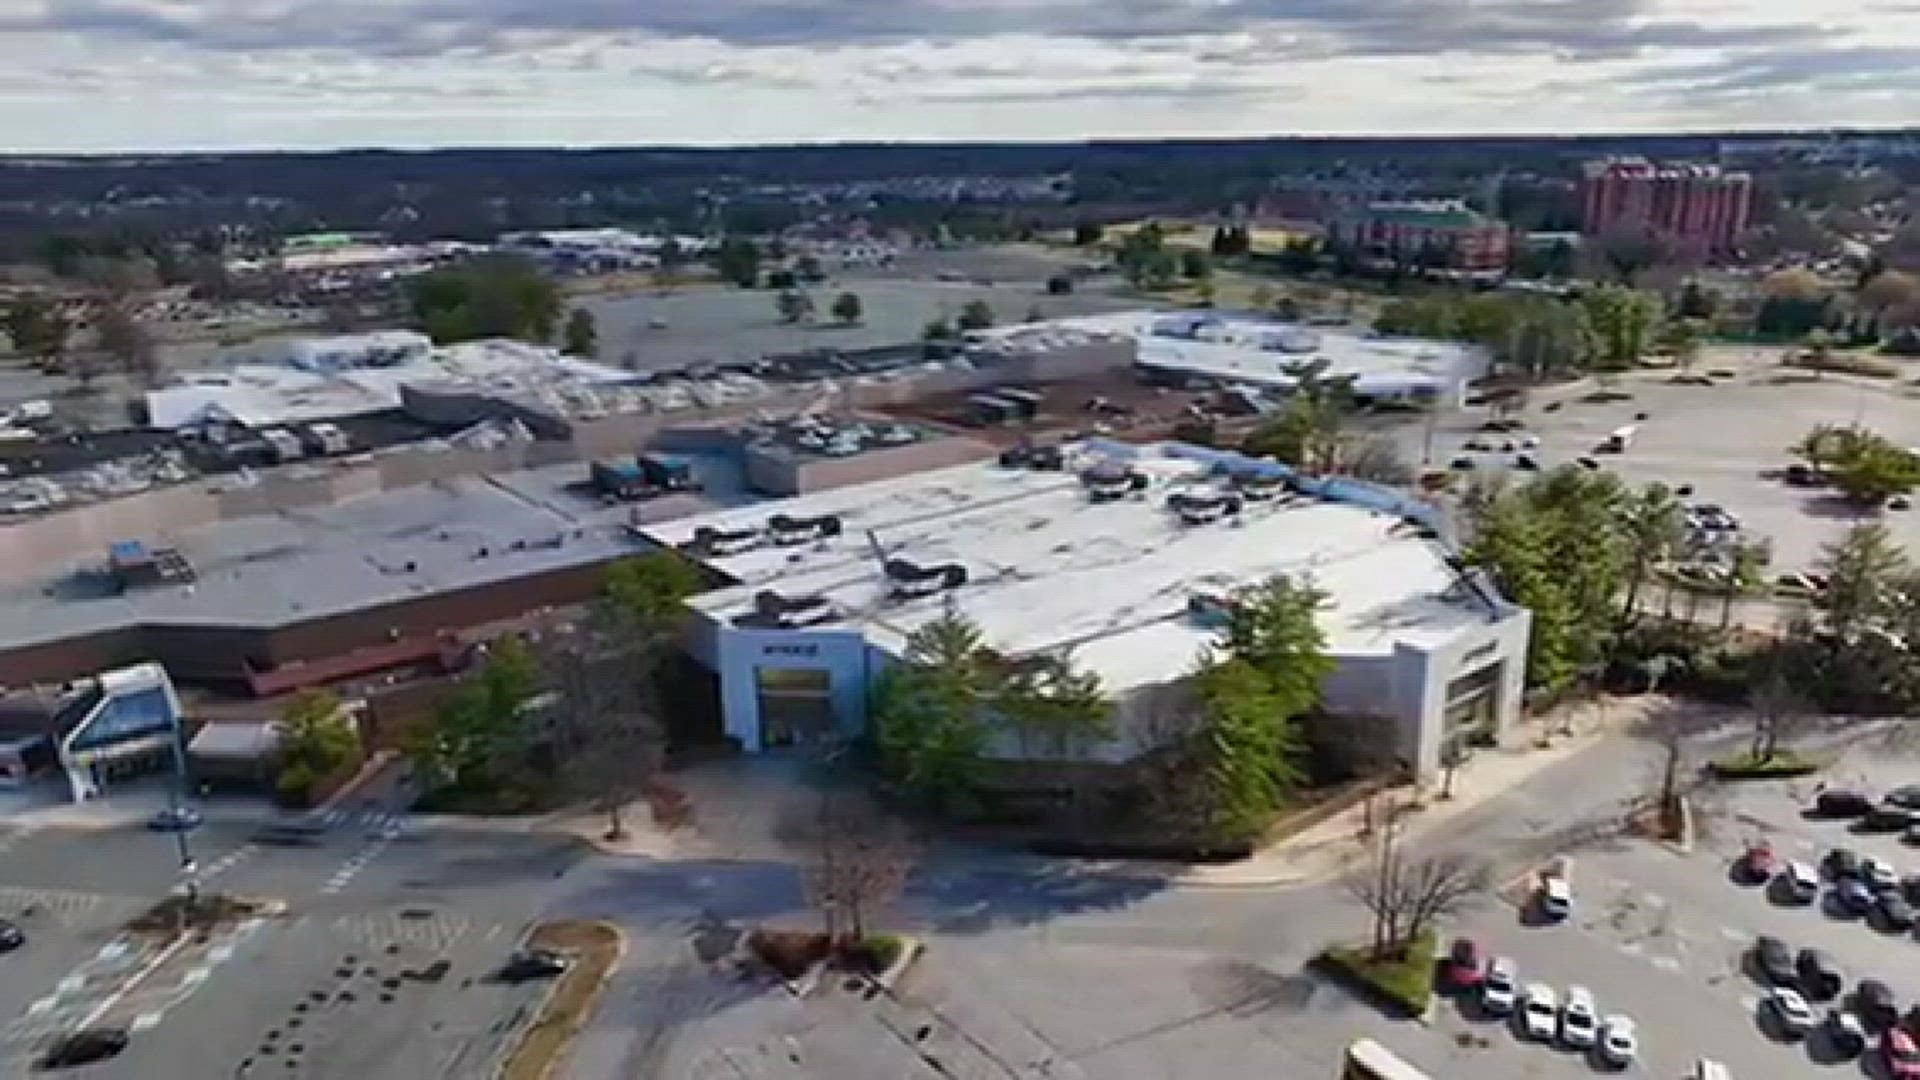 After 45 years, Lakeforest Mall in Gaithersburg to close at the end of March.
Credit: Tim Pruss, MyDrone.Pro